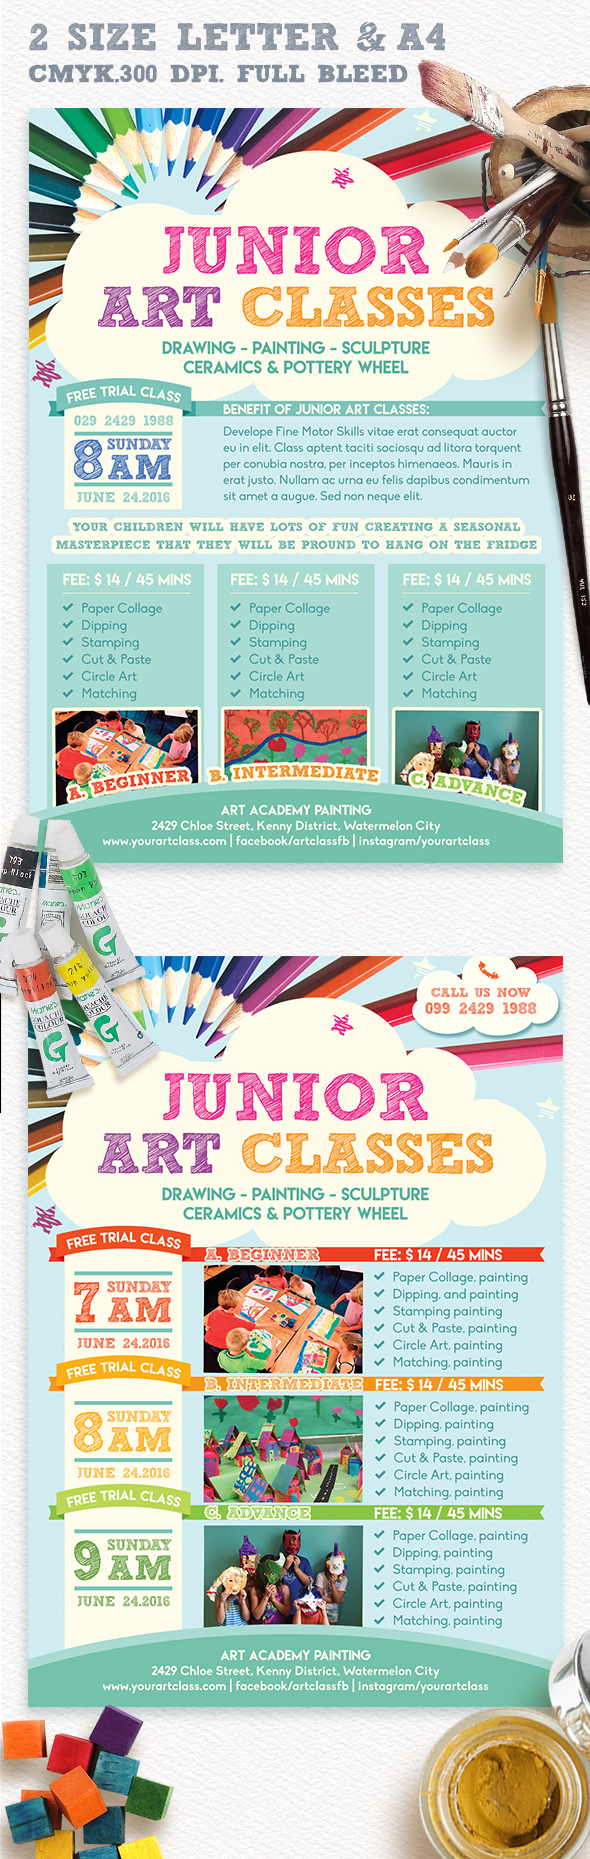 Junior Art Free Trial Class Flyer Template by Emty-Graphic on  Throughout Art Class Flyer Template Throughout Art Class Flyer Template